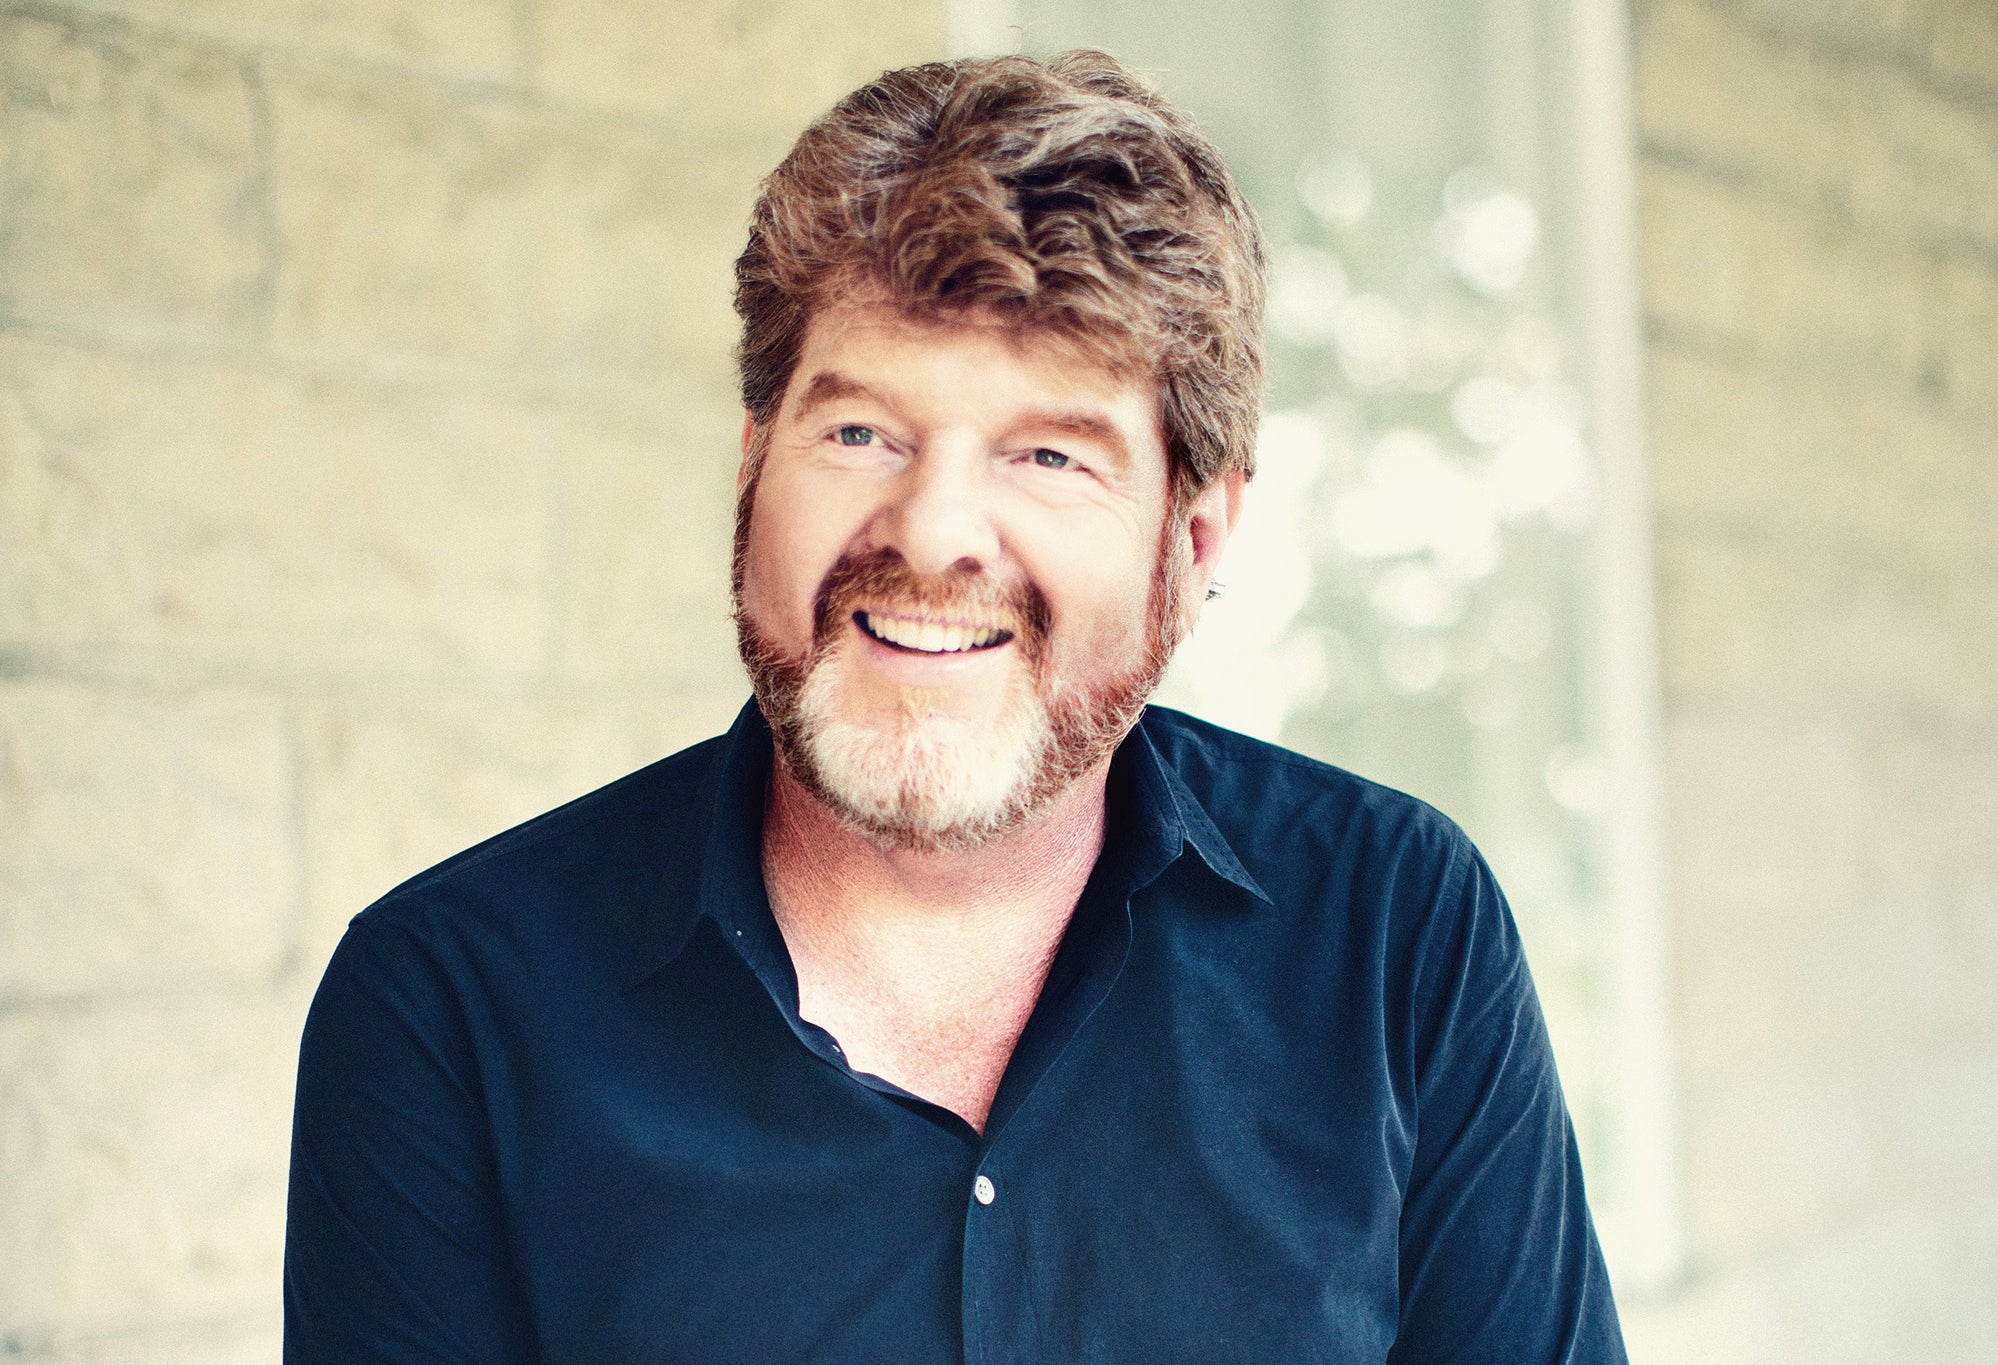 Mac McAnally pre-sale password for approved tickets in Ponte Vedra Beach